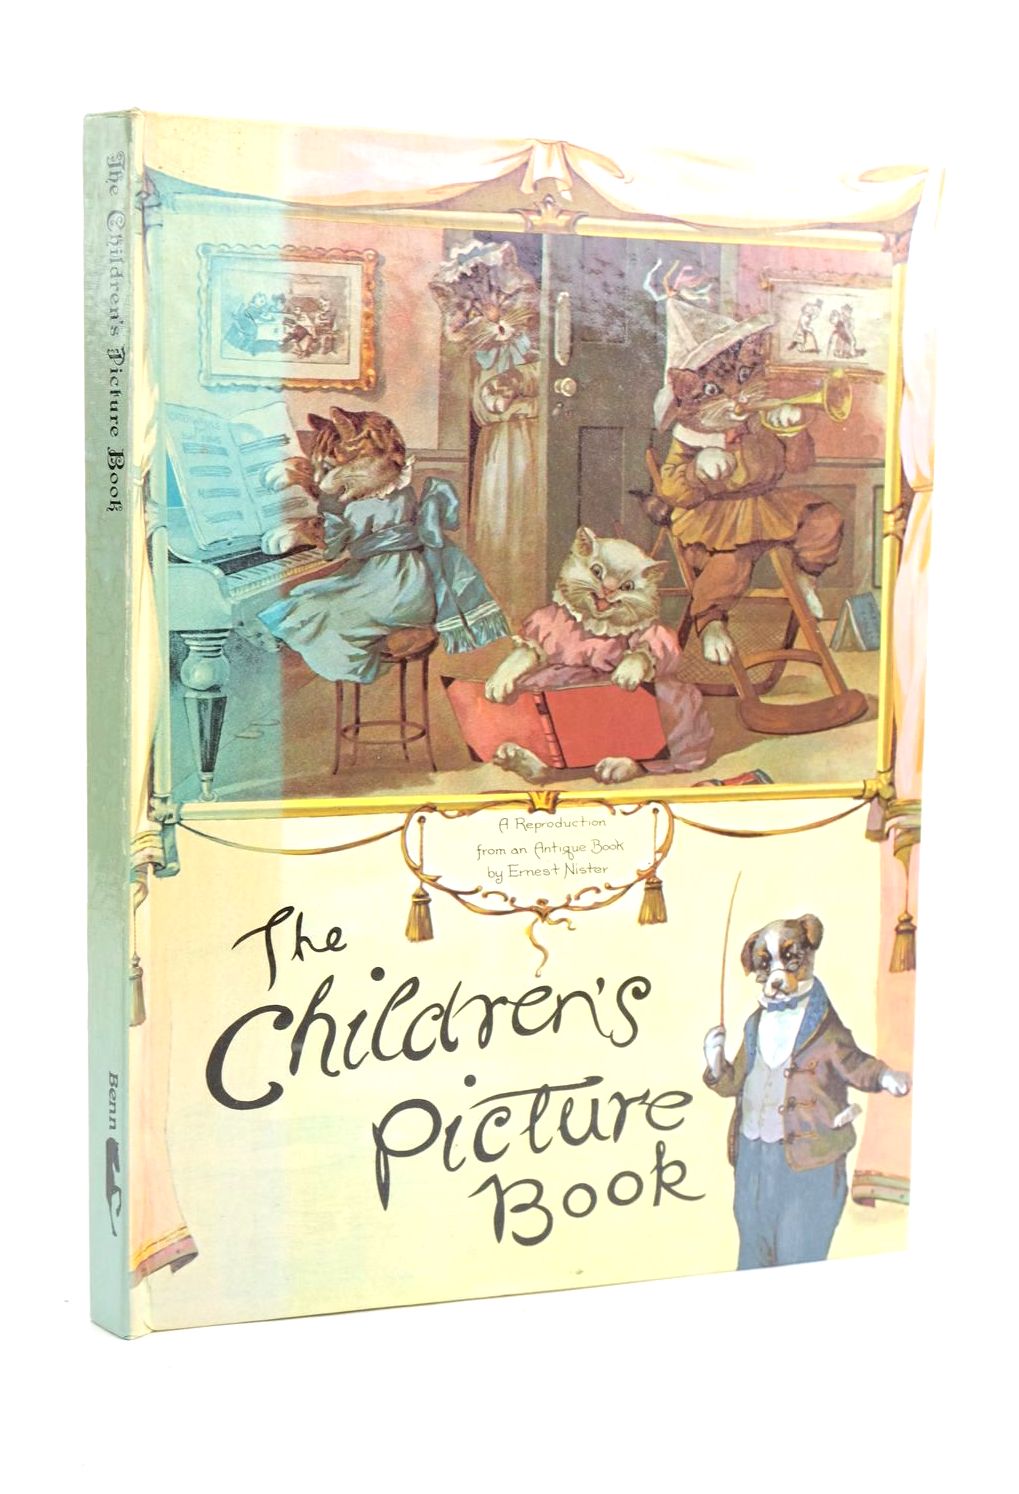 Photo of THE CHILDREN'S PICTURE BOOK published by Ernest Benn Limited (STOCK CODE: 1319992)  for sale by Stella & Rose's Books